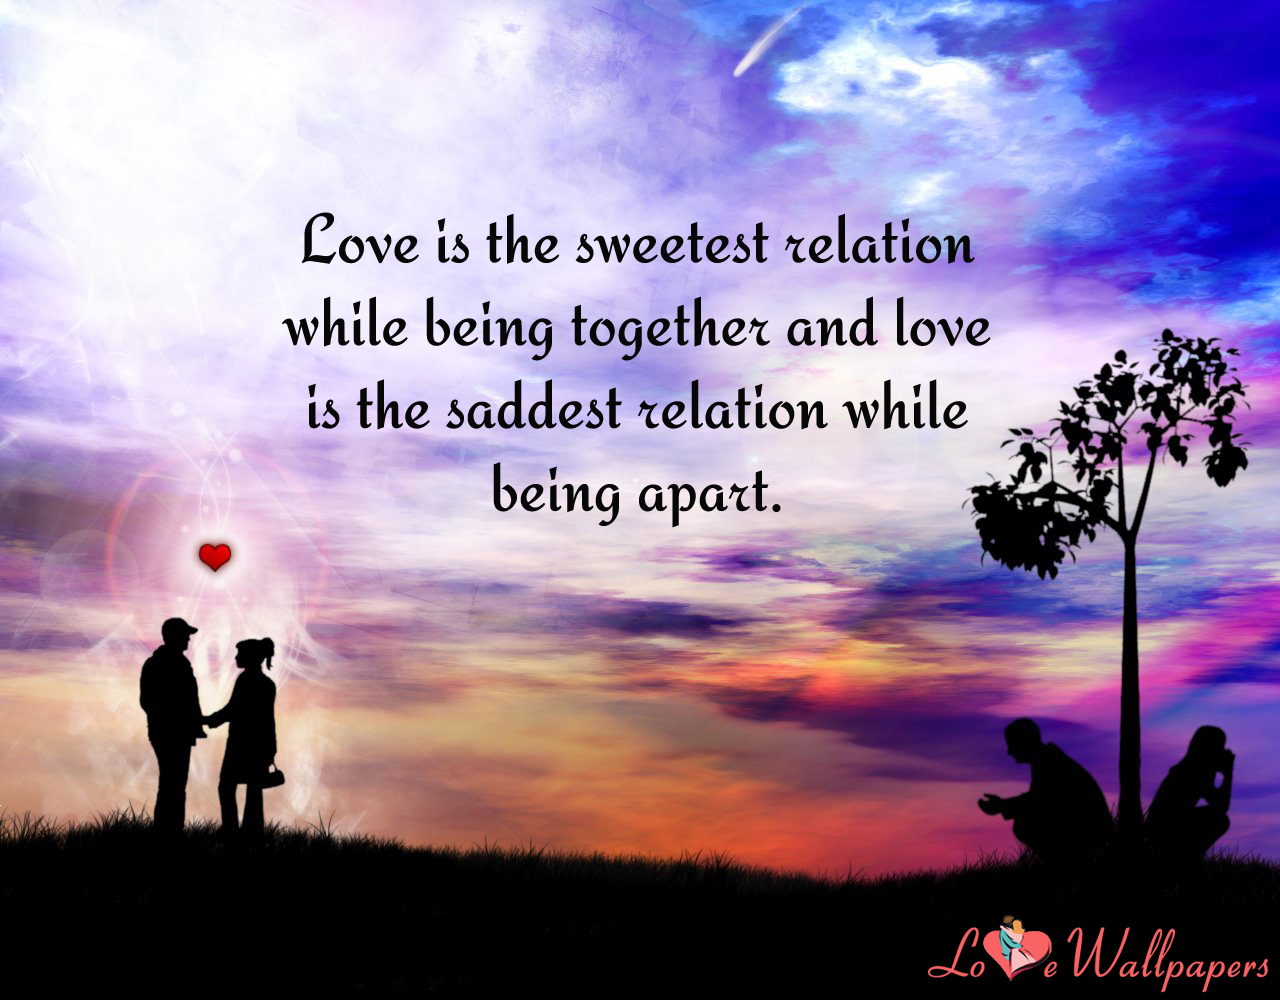 sad love story wallpaper,people in nature,sky,text,natural landscape,love